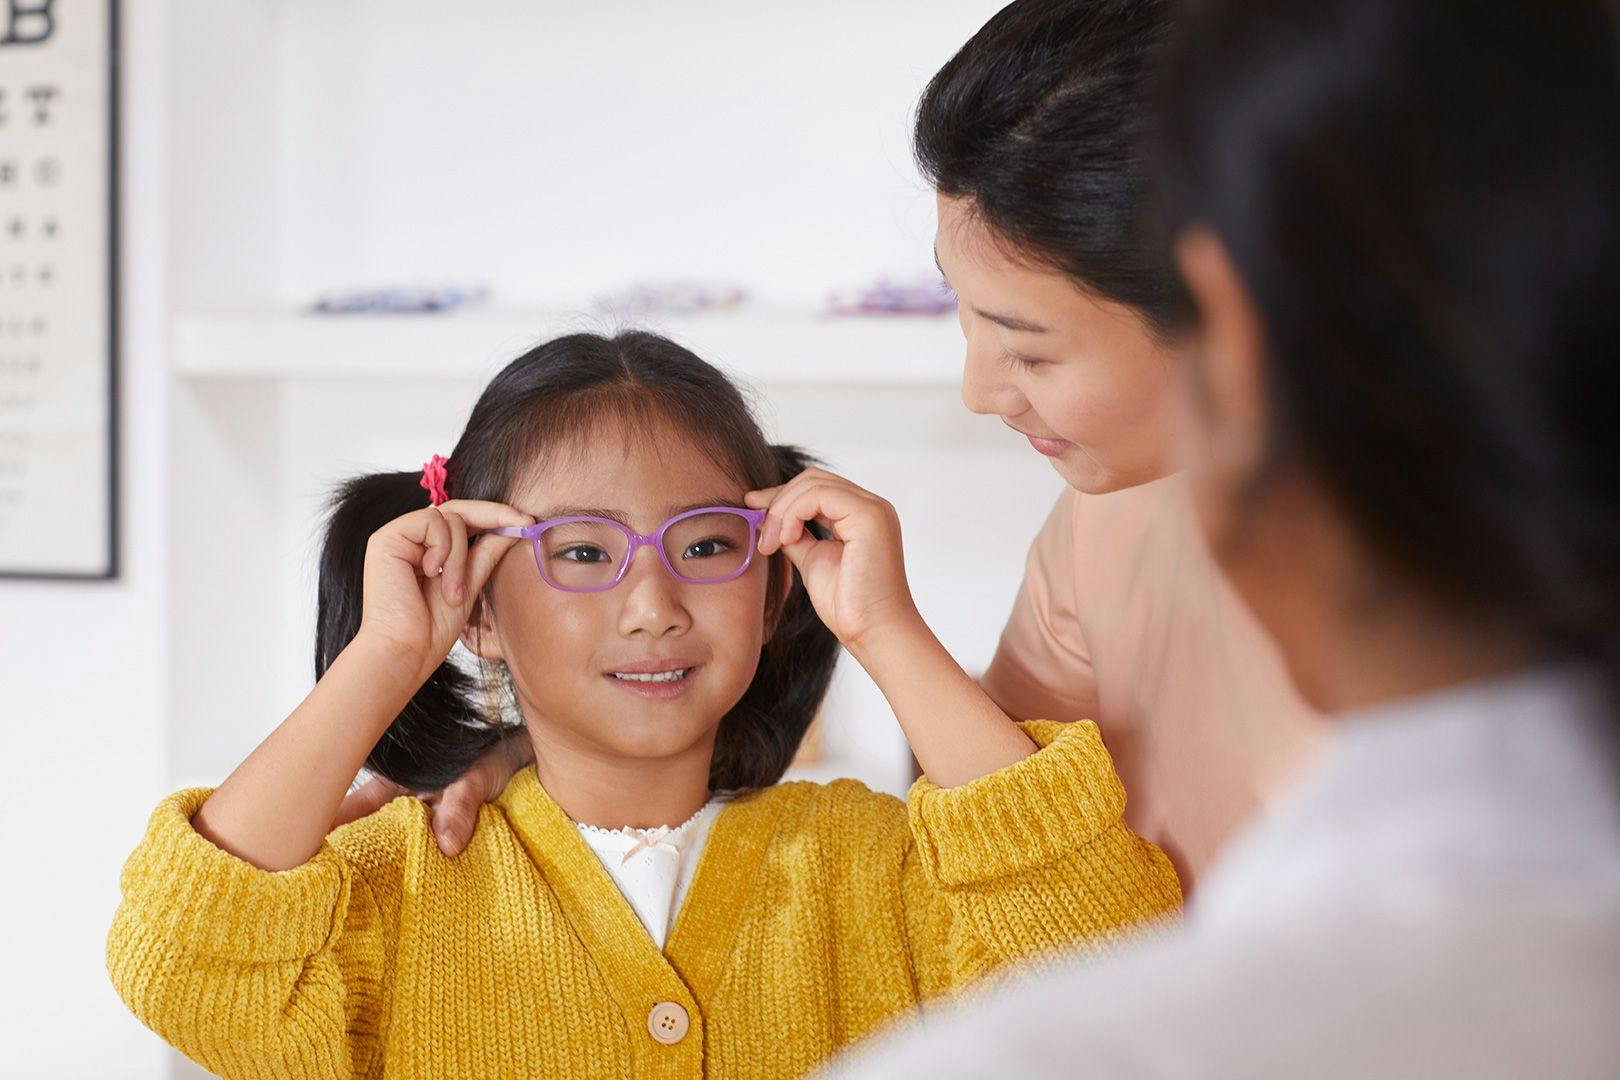 The last several decades have seen a steady rise in the prevalence of myopia worldwide, notably under the effect of lifestyle changes. It is estimated that nearly 5 billion people will be myopic by 2050. (Photo courtesy of SightGlass Vision)